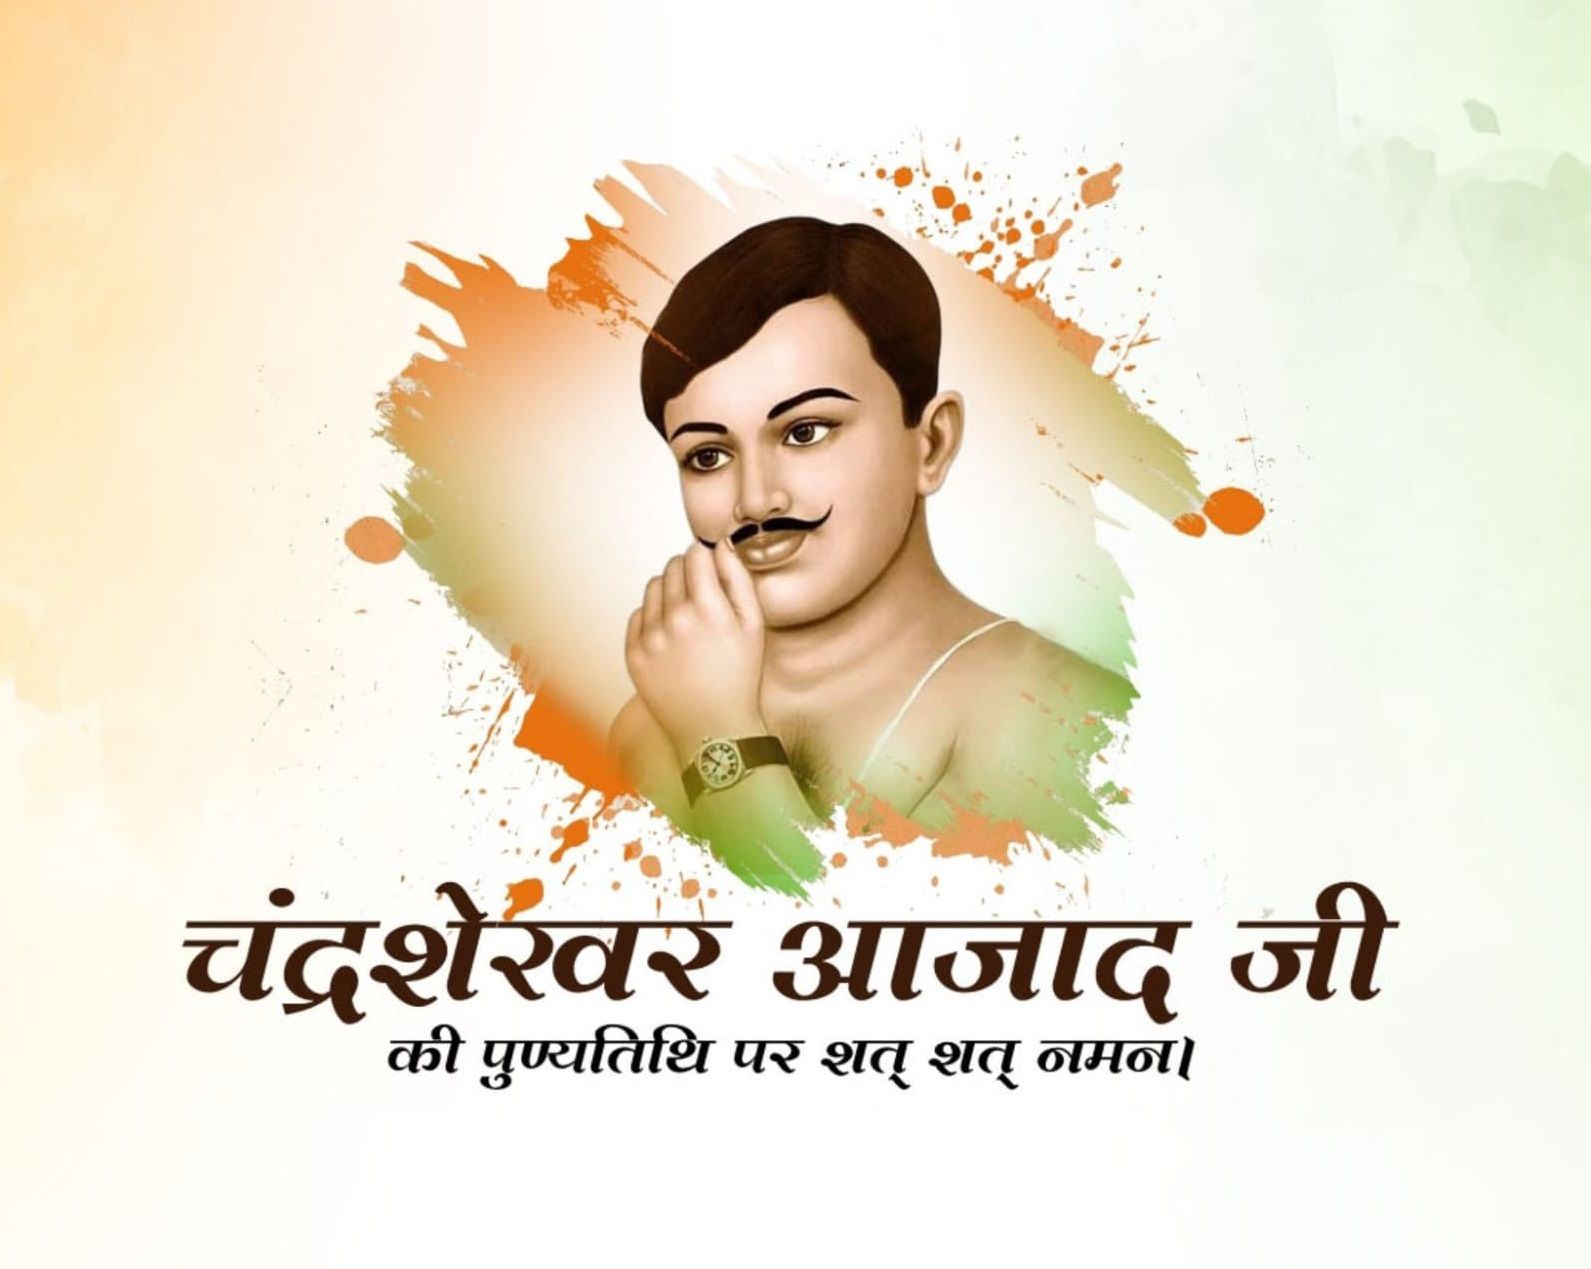 Remembering Indian Freedom Fighter ChandraShekhar Azad on his death anniversary 